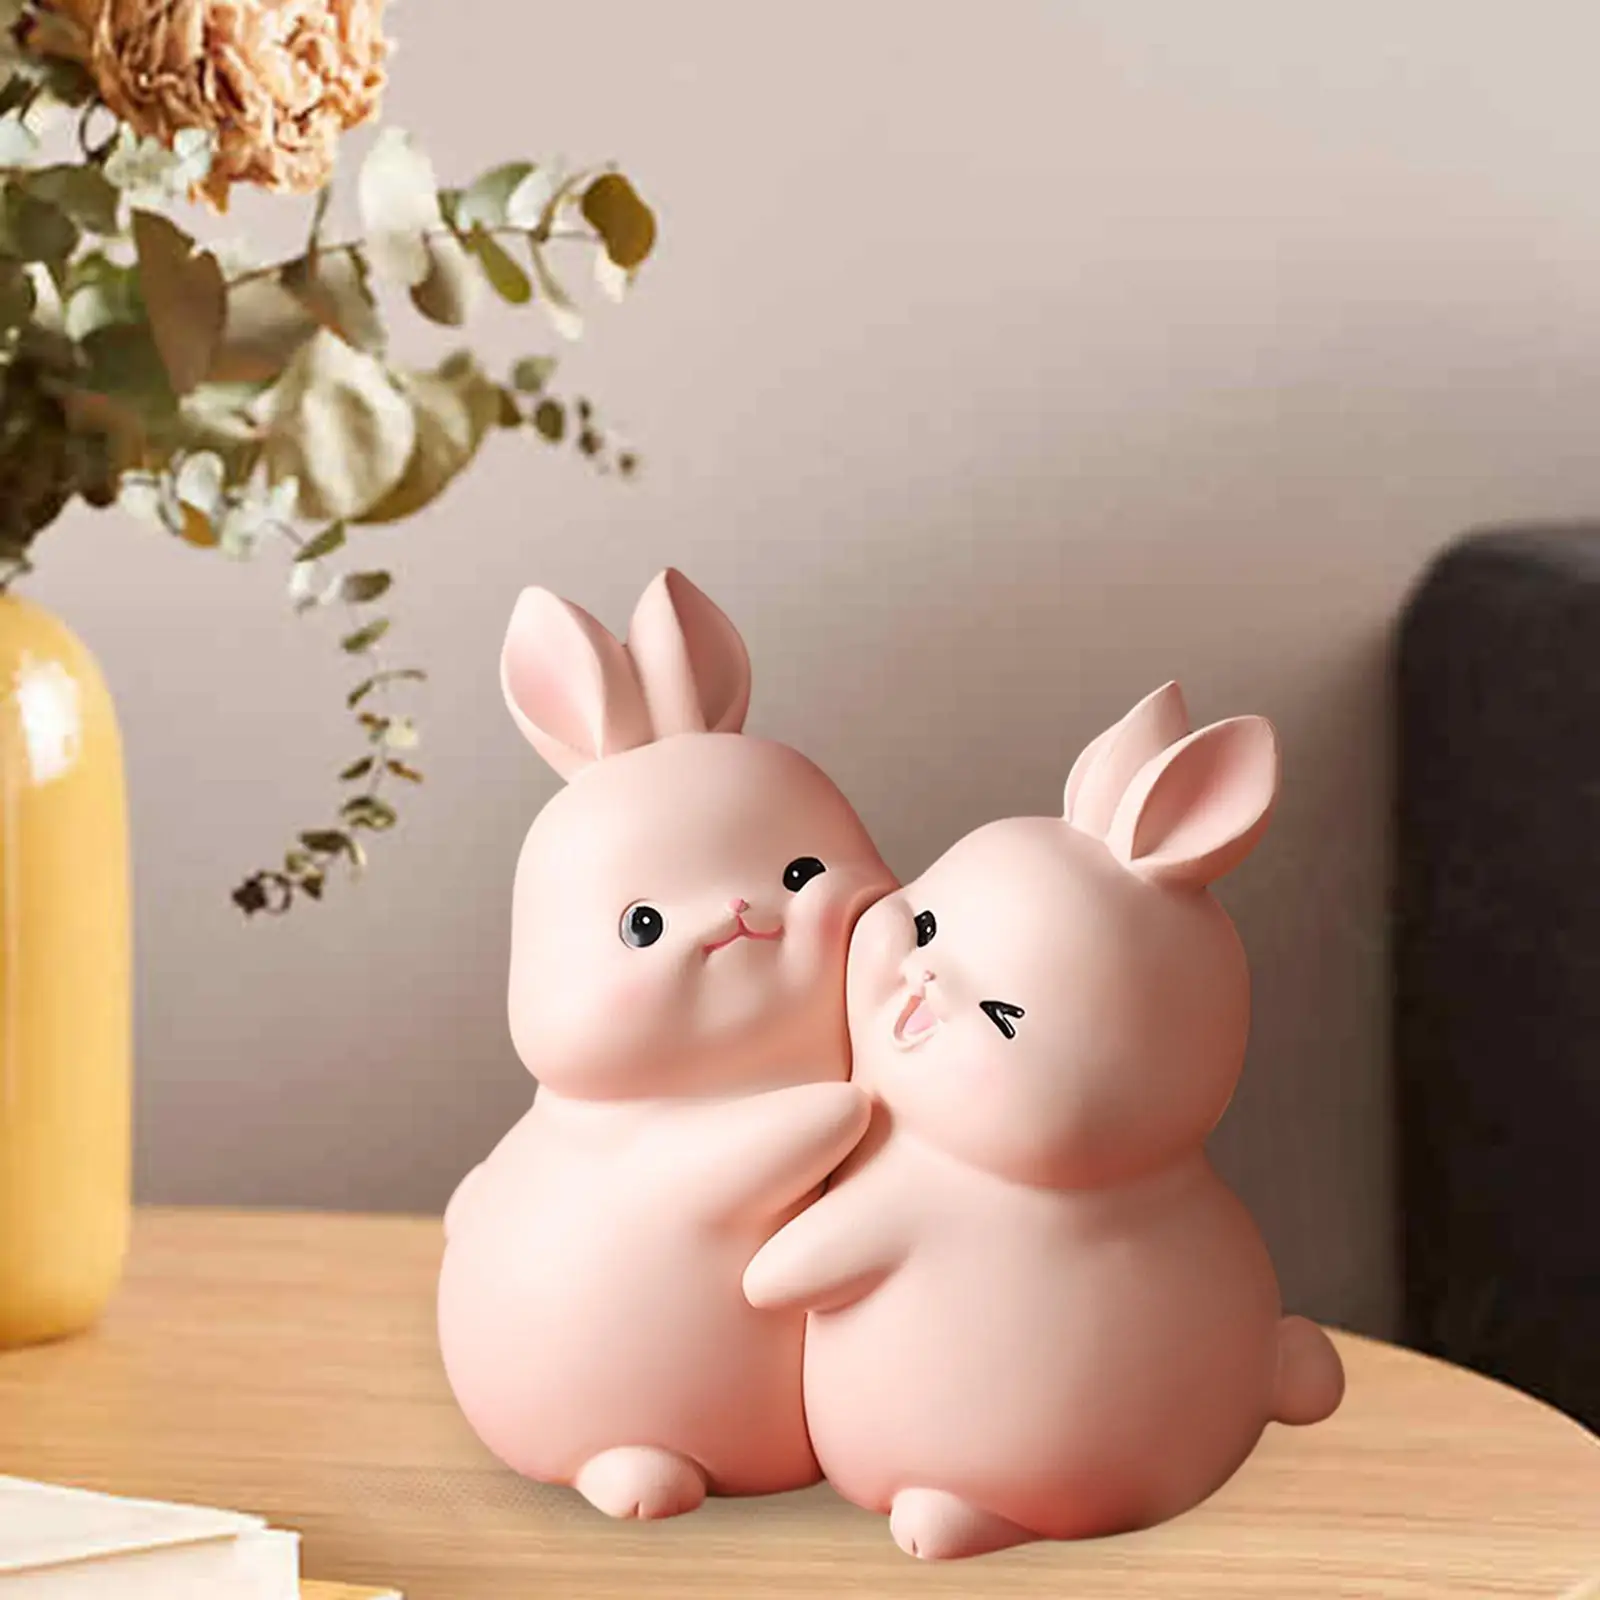 Rabbit Bookends Book Organizer Support Bunny Book Ends Stopper Decorative Bookends for Shelves Kids Rooms Cabinet Desk Ornaments